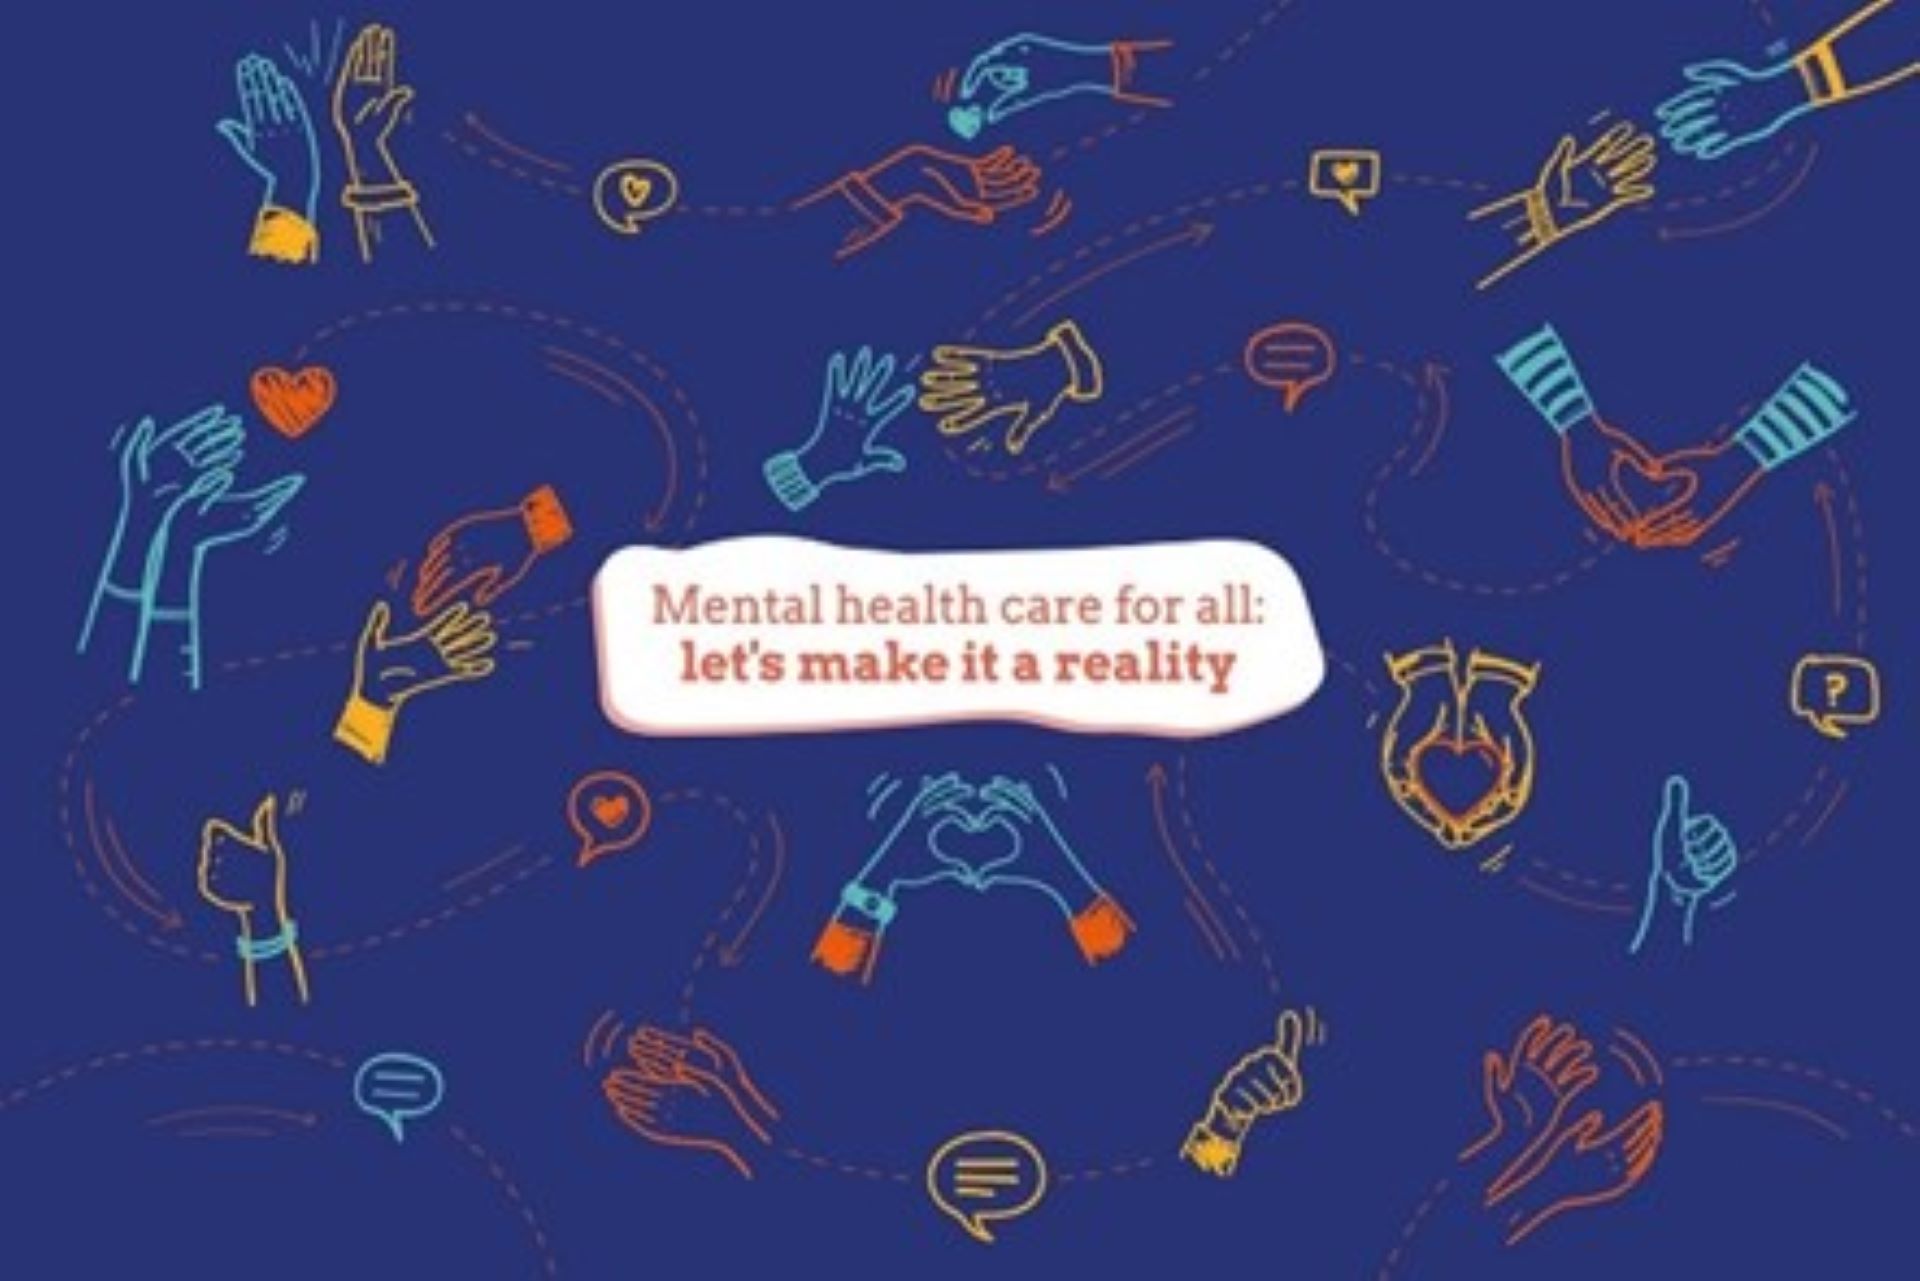 Mental Health care for all